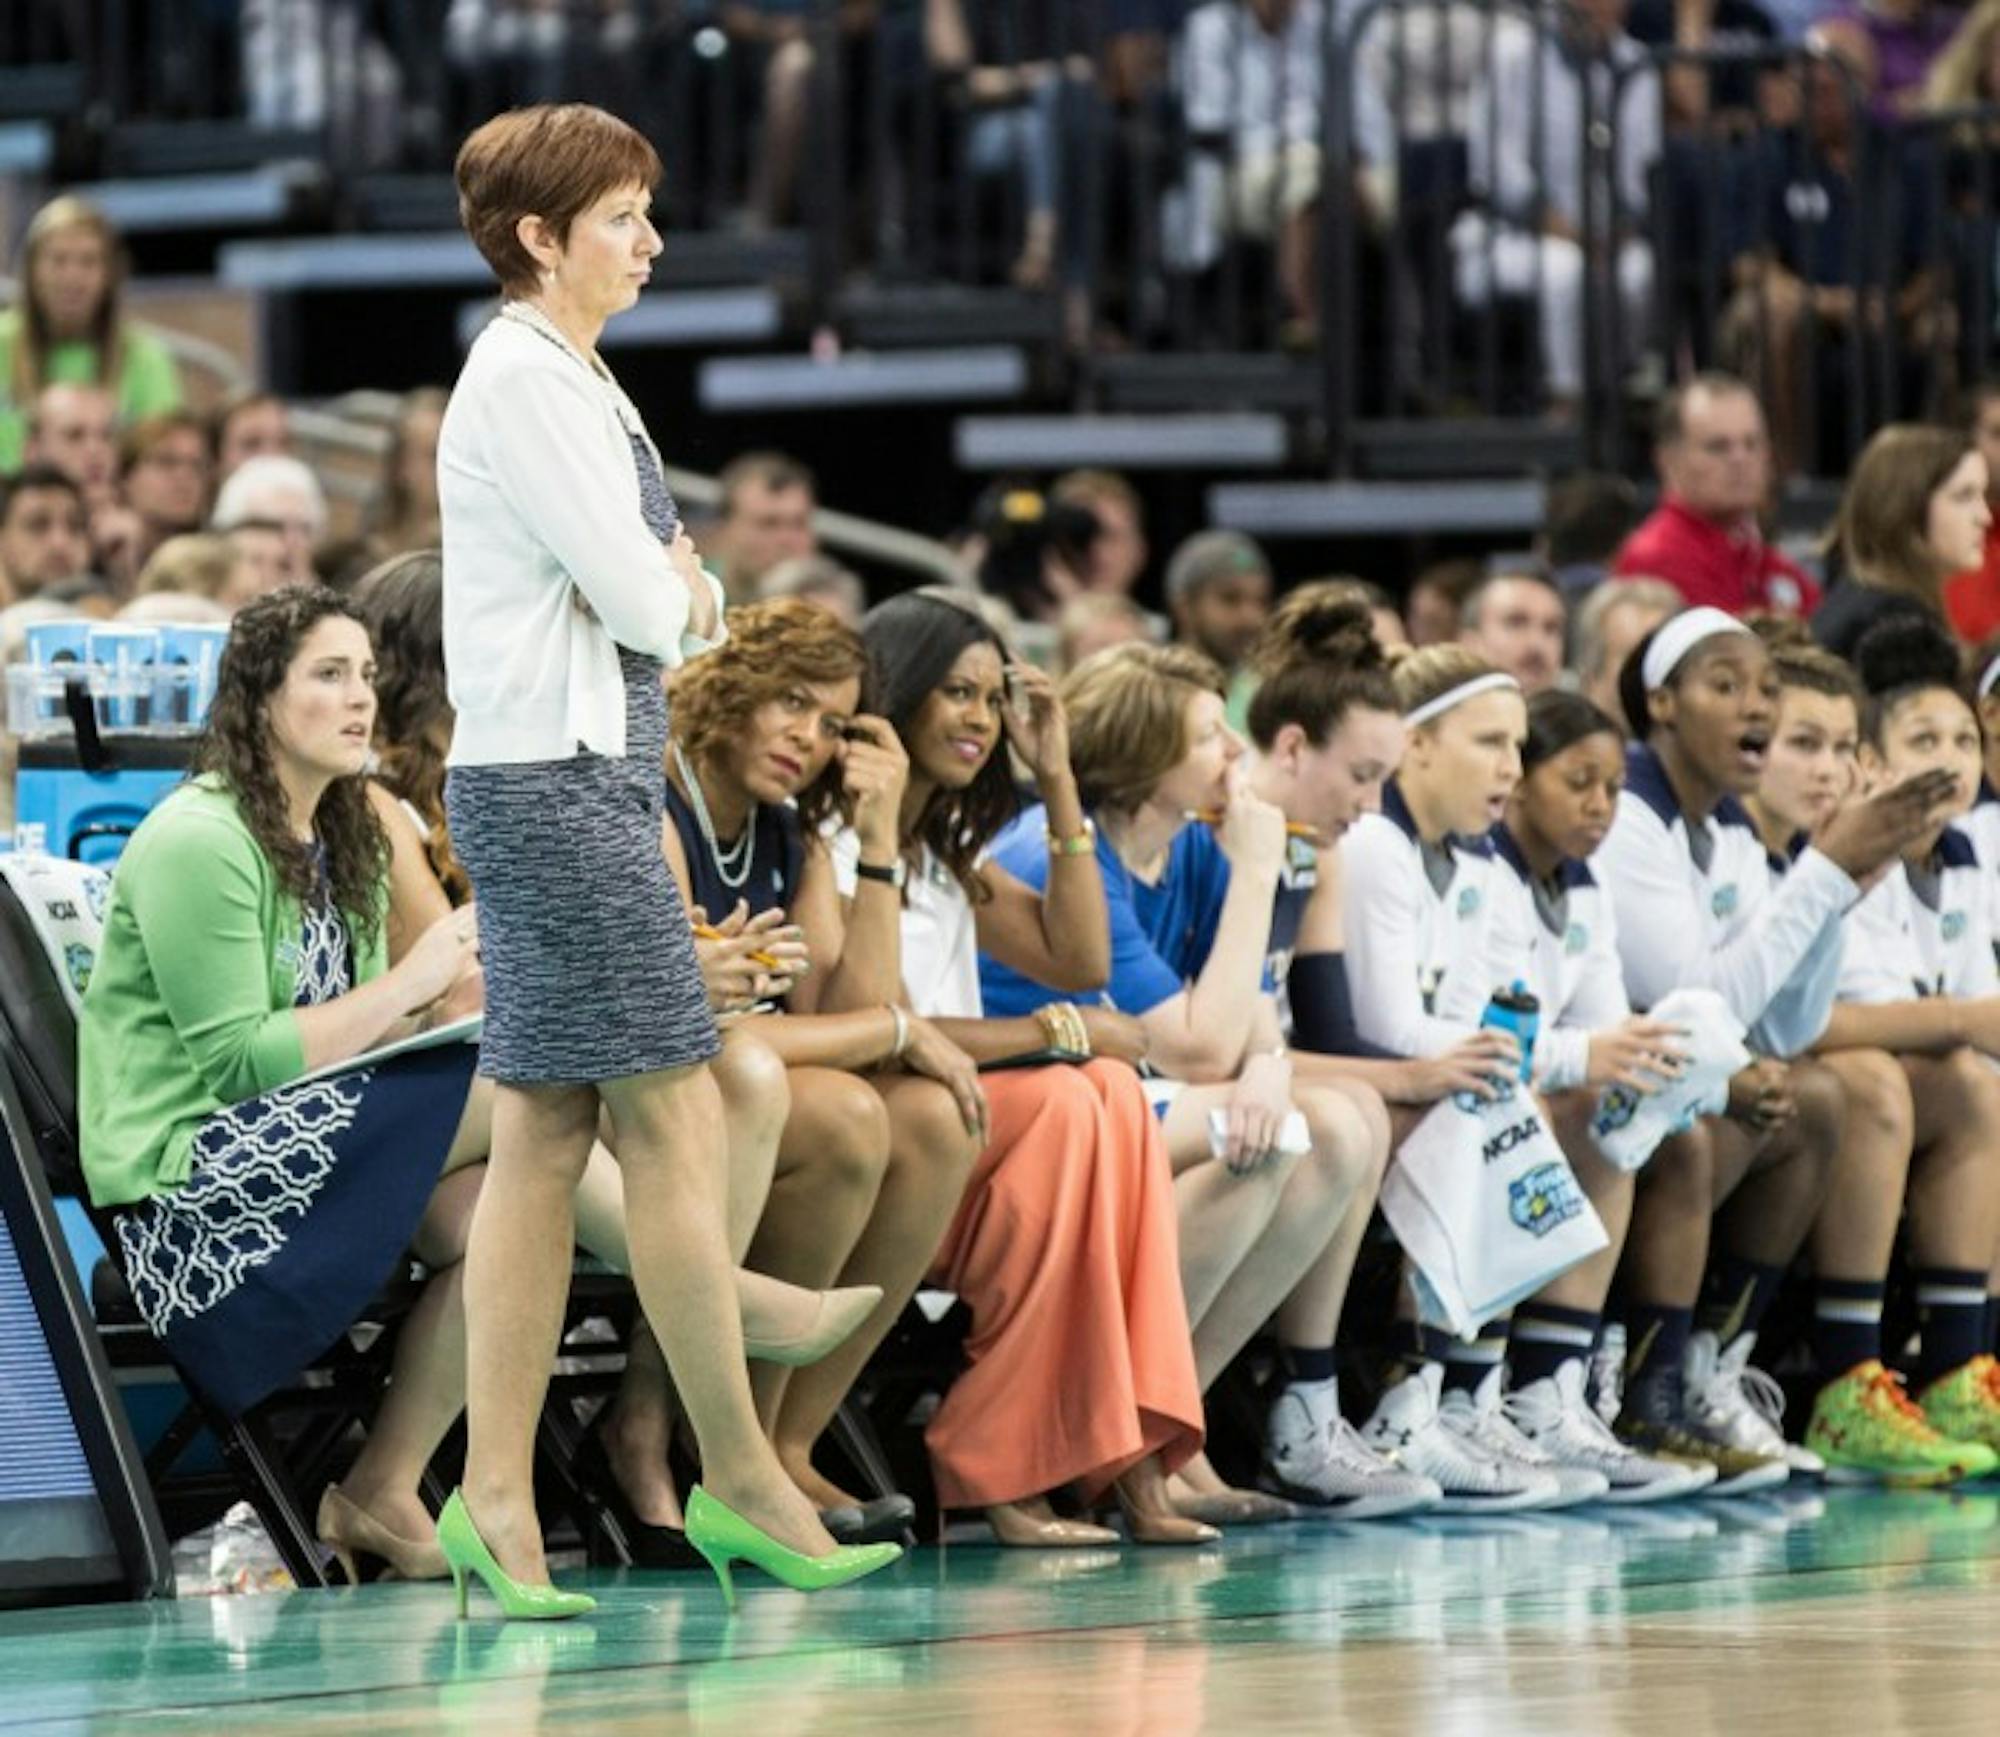 Irish head coach Muffet McGraw patrols the sideline during Notre Dame’s 63-53 loss to Connecticut at Amalie Arena in Tampa on April 7. McGraw is now 700-221 in her career as head coach of the Irish.